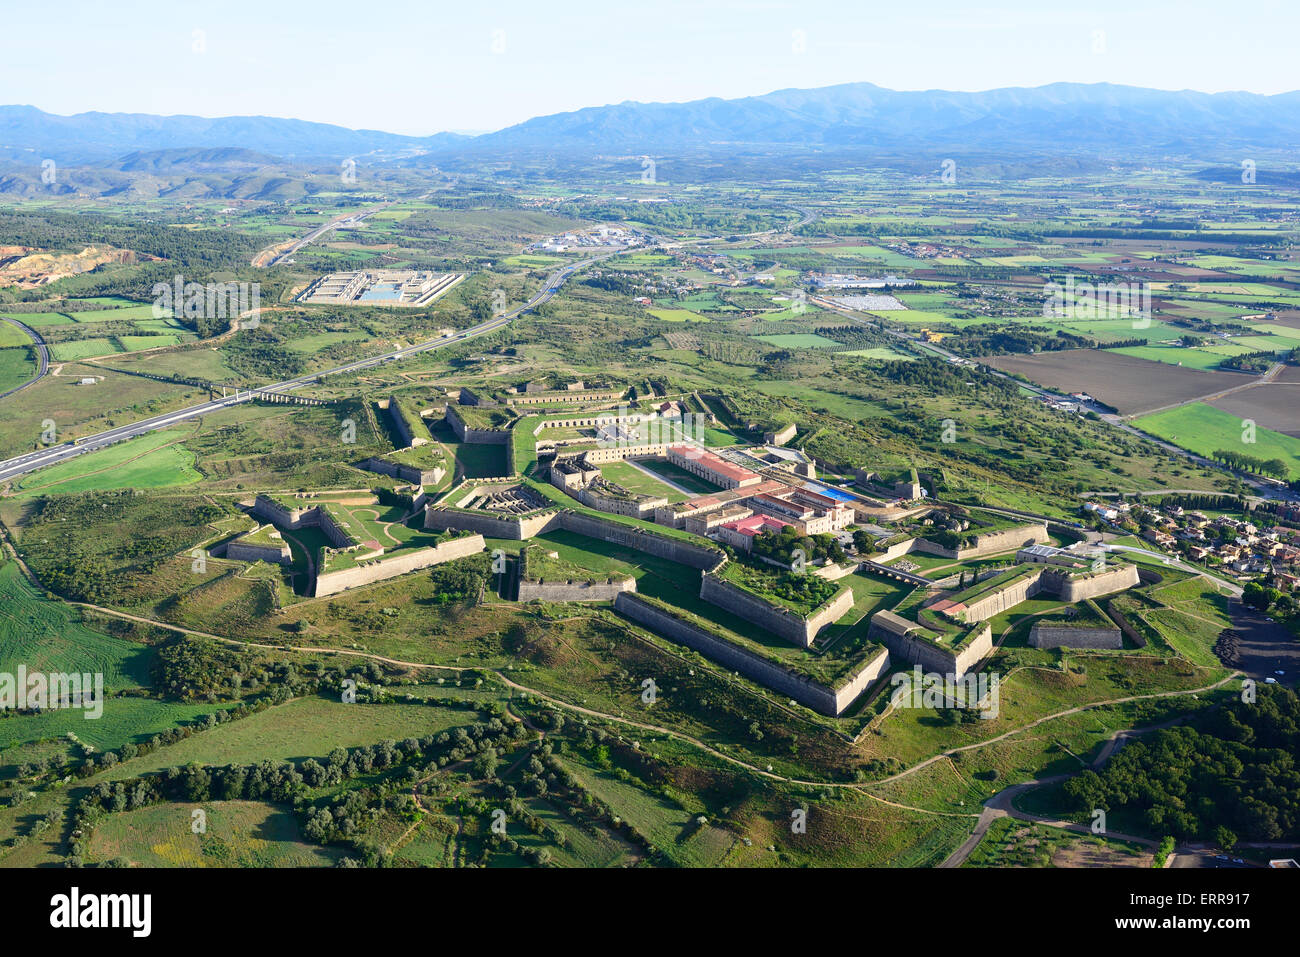 AERIAL VIEW. Sant Ferran Castle with the Pyrenees mountains in the distance. Figueres, Costa Brava, Province of Girona, Catalonia, Spain. Stock Photo